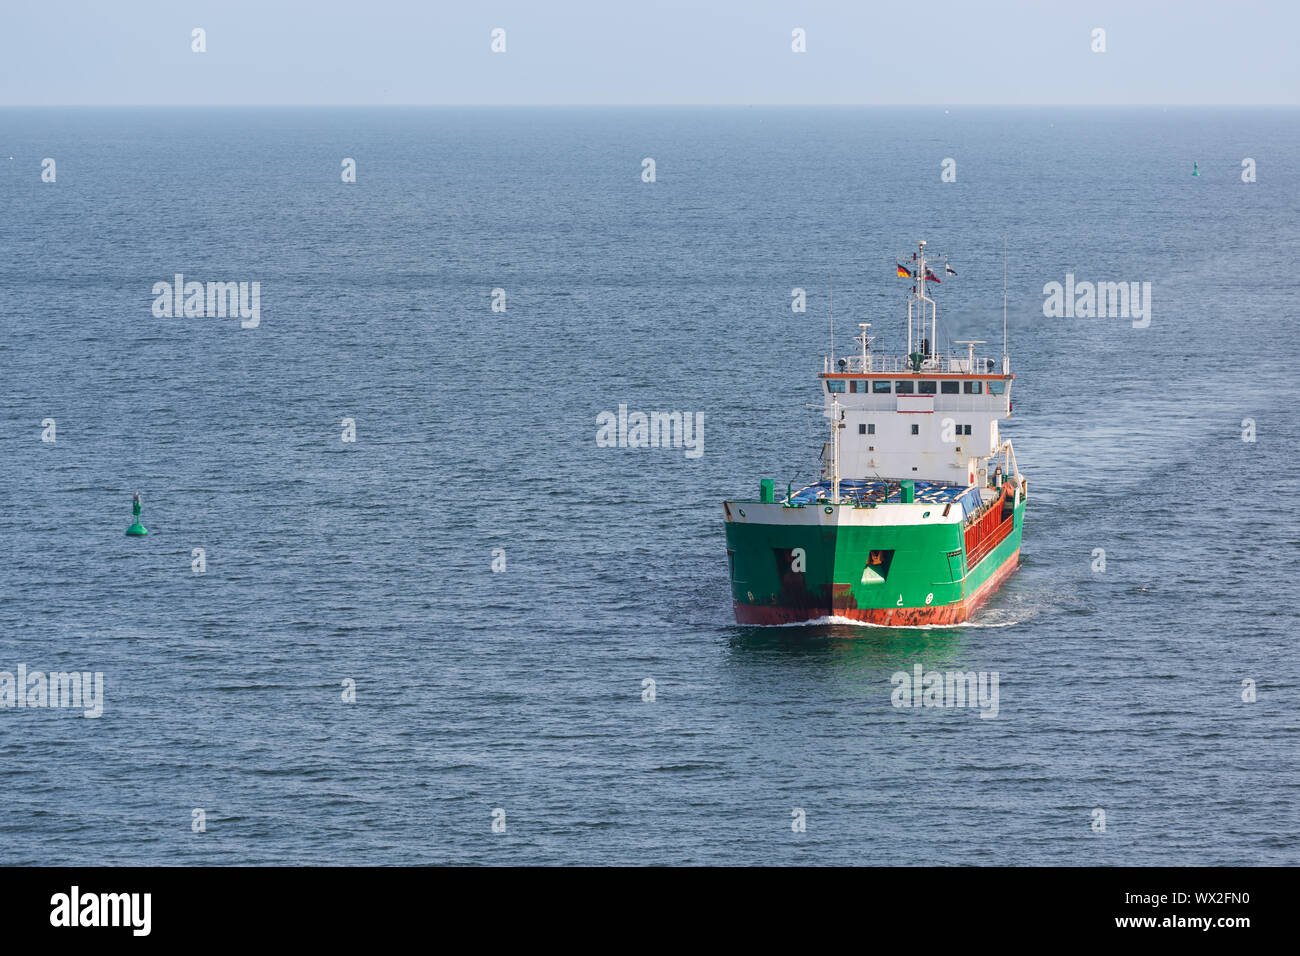 Aerial view of a freighter sailing at the big blue sea Stock Photo